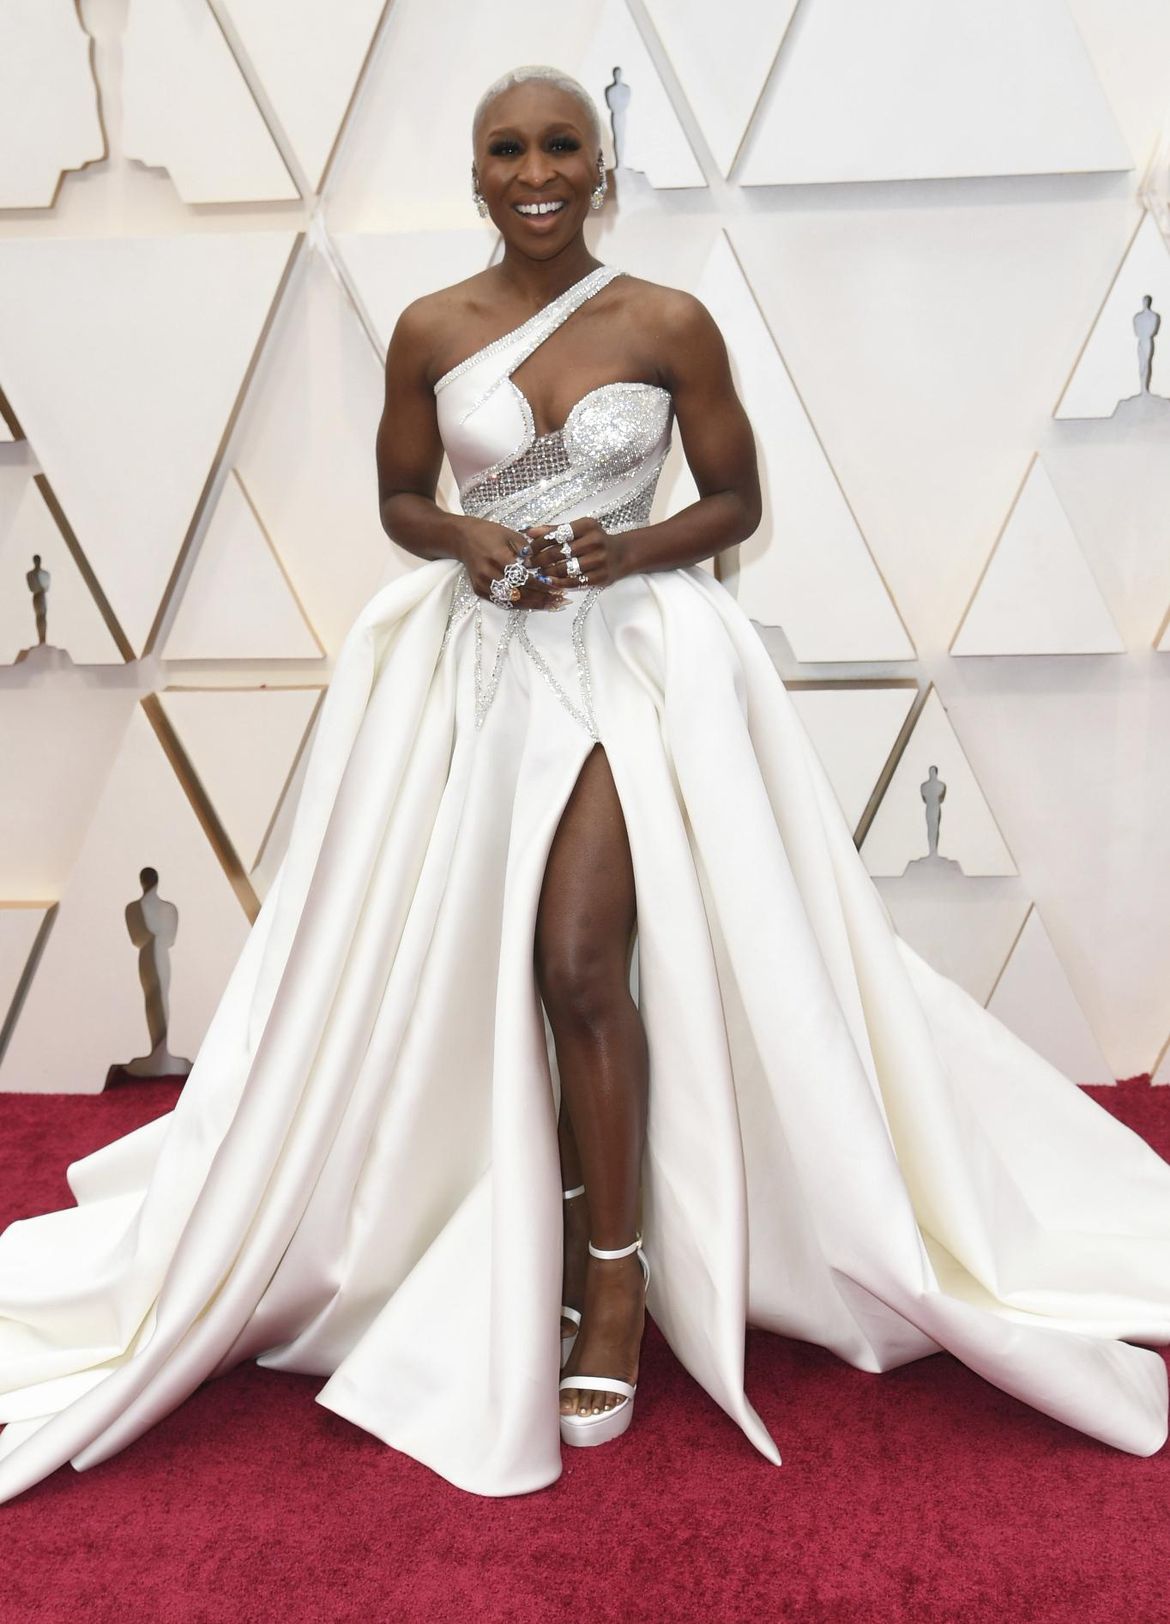 92nd Academy Awards arrivals - Feb. 9, 2020 | The Spokesman-Review